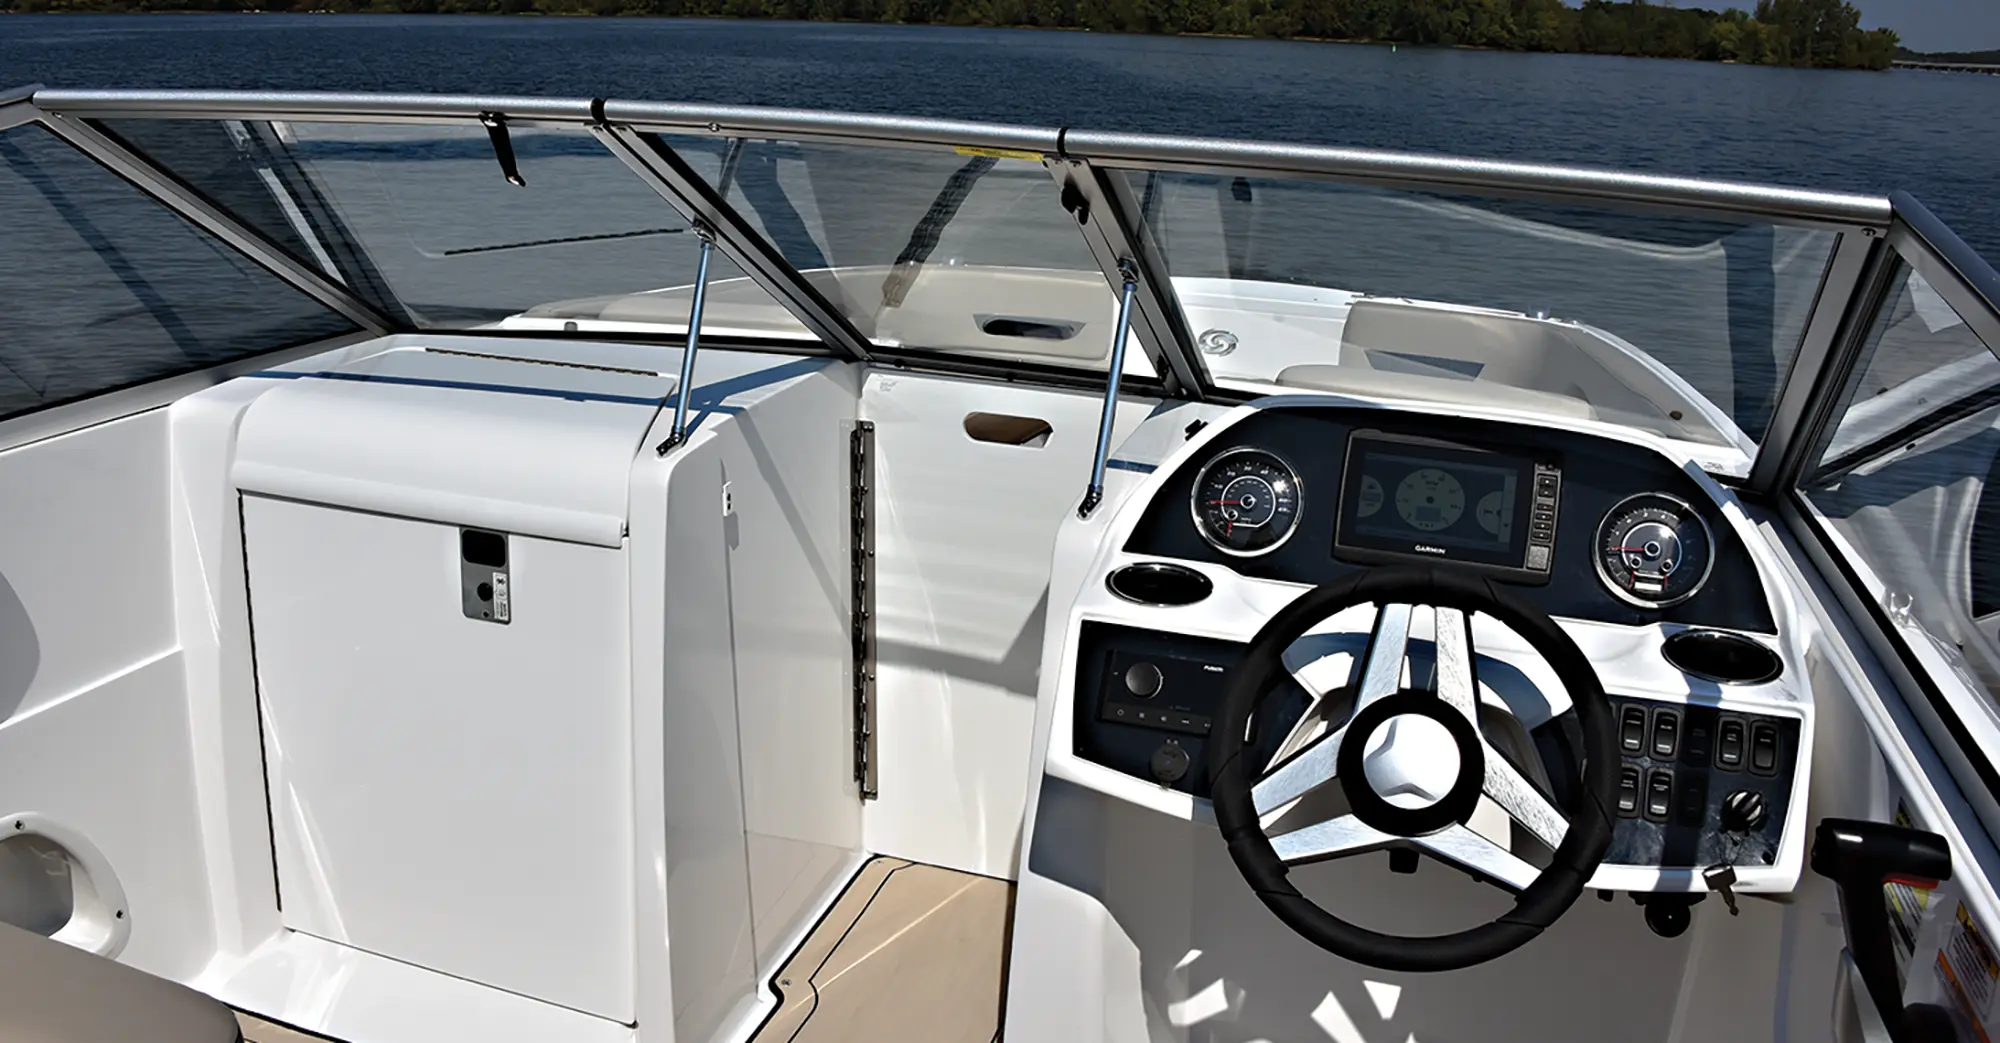 Aerial interior angle photo view of the driver's side and storage space area nearby of the Hurricane SunDeck 235 pontoon motorboat vehicle